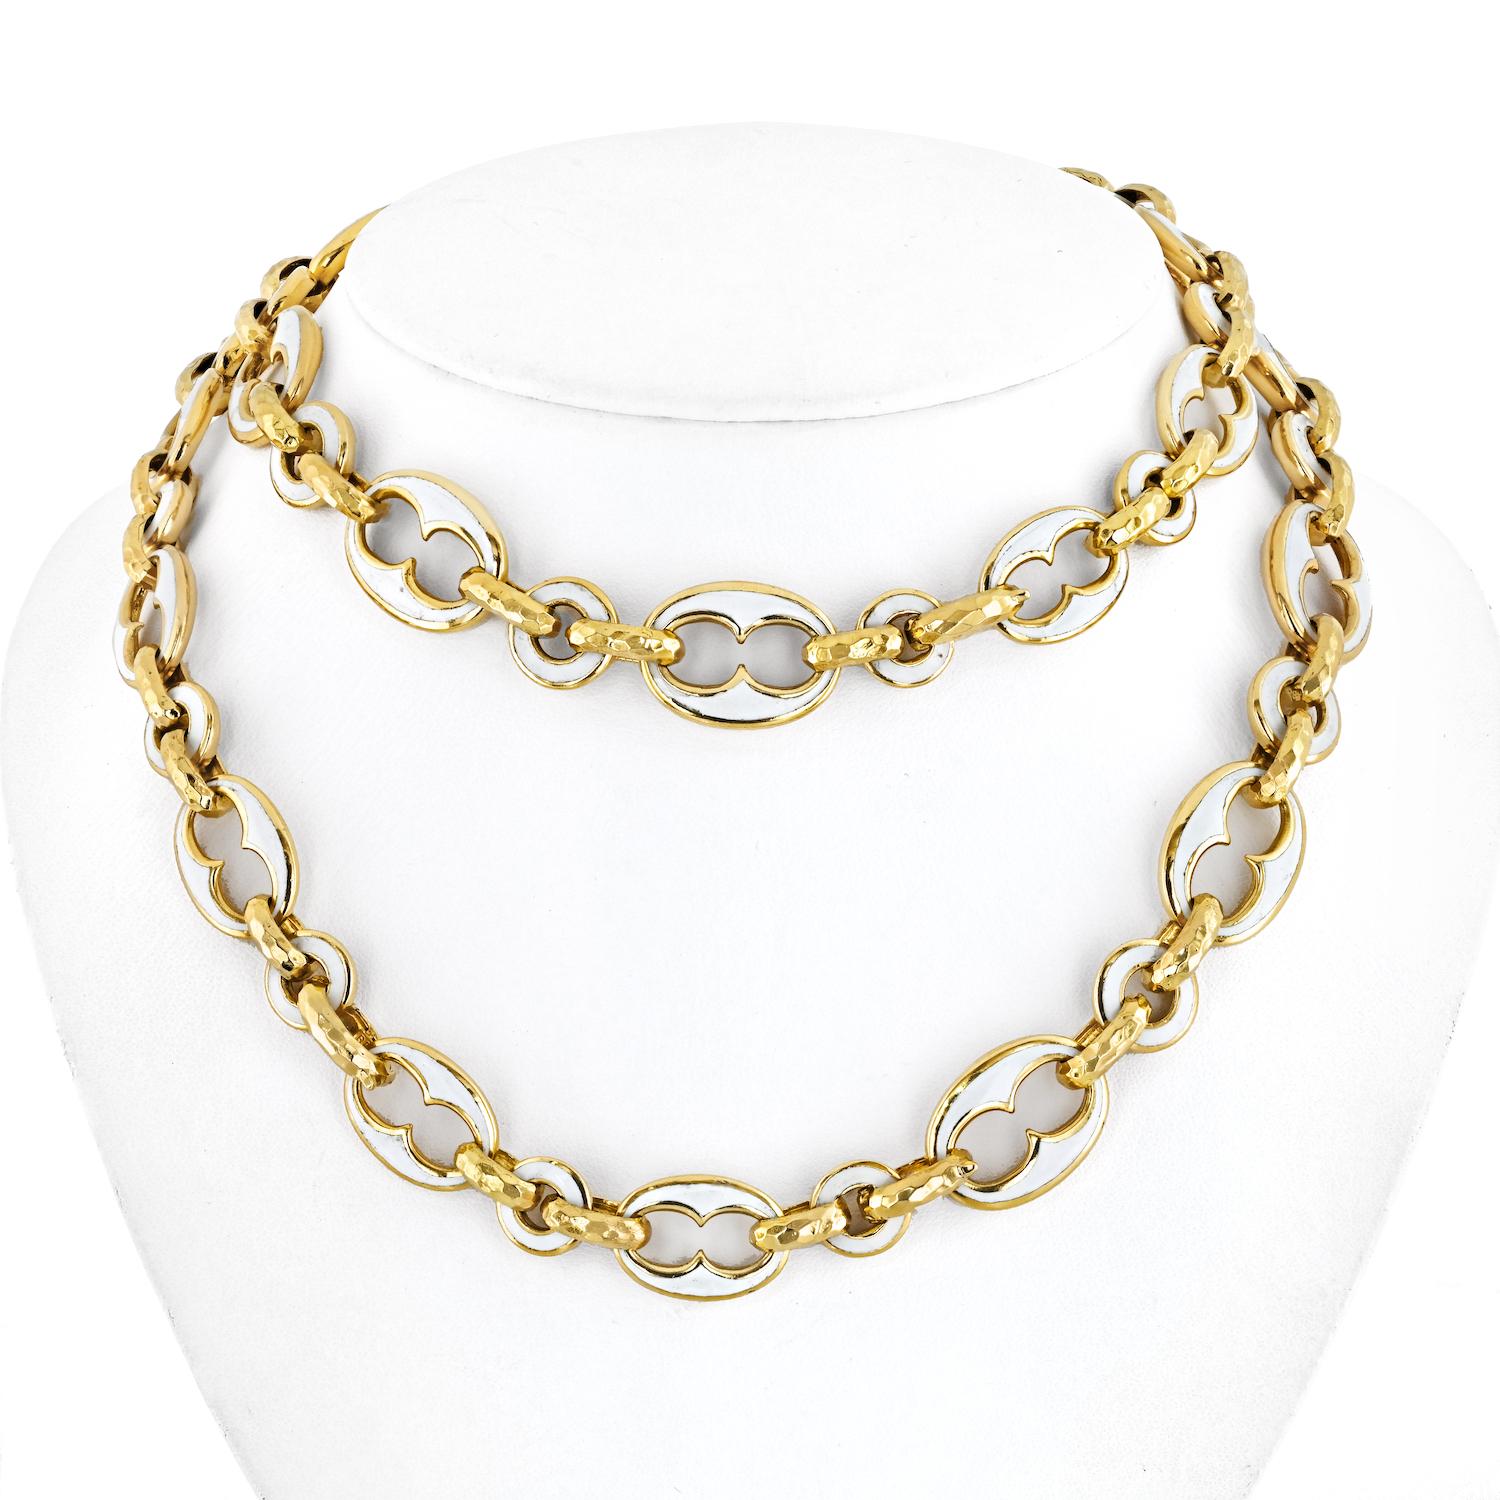 Indulge in the timeless elegance of this David Webb Gold Links Necklace, a 32-inch masterpiece that seamlessly blends sophistication with artistic flair. The gold links, adorned with white enamel, create a striking contrast and add a touch of